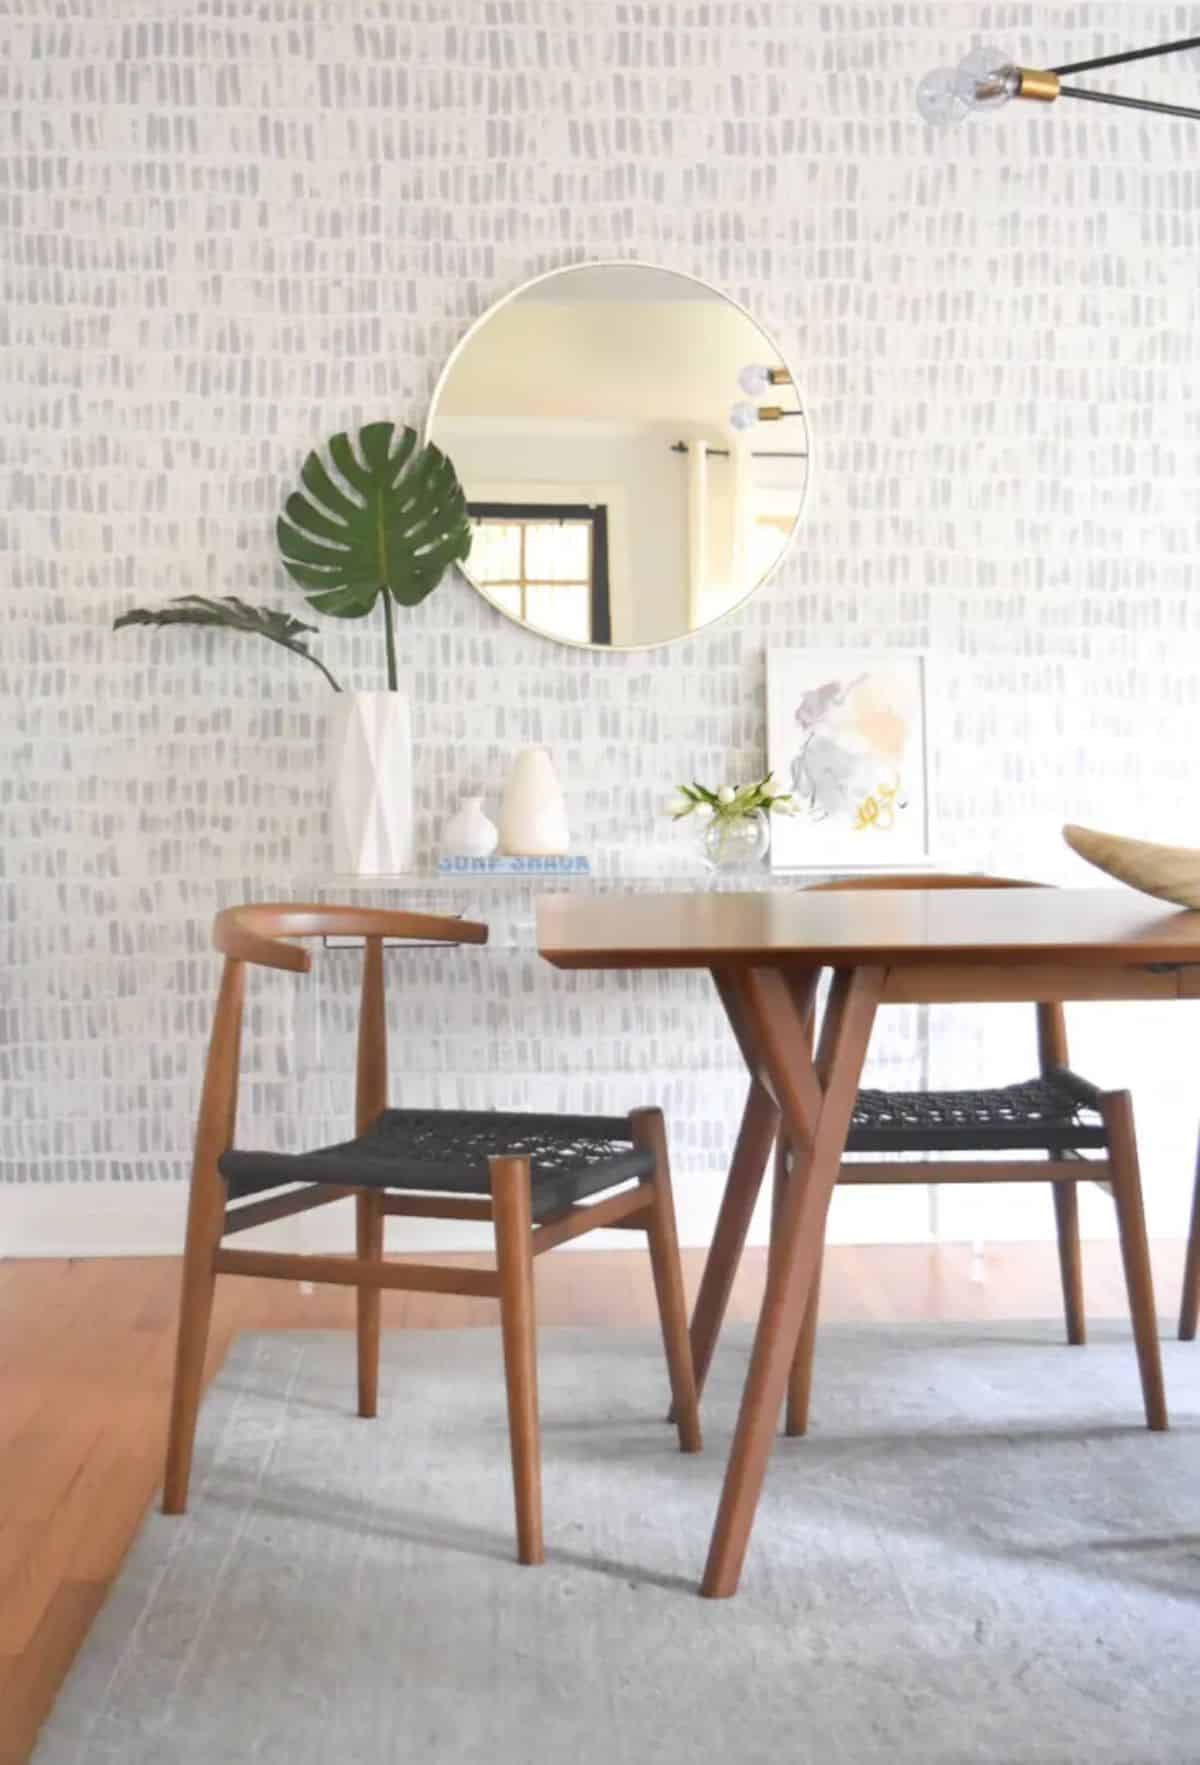 DIY Hand-Painted Faux Wallpaper